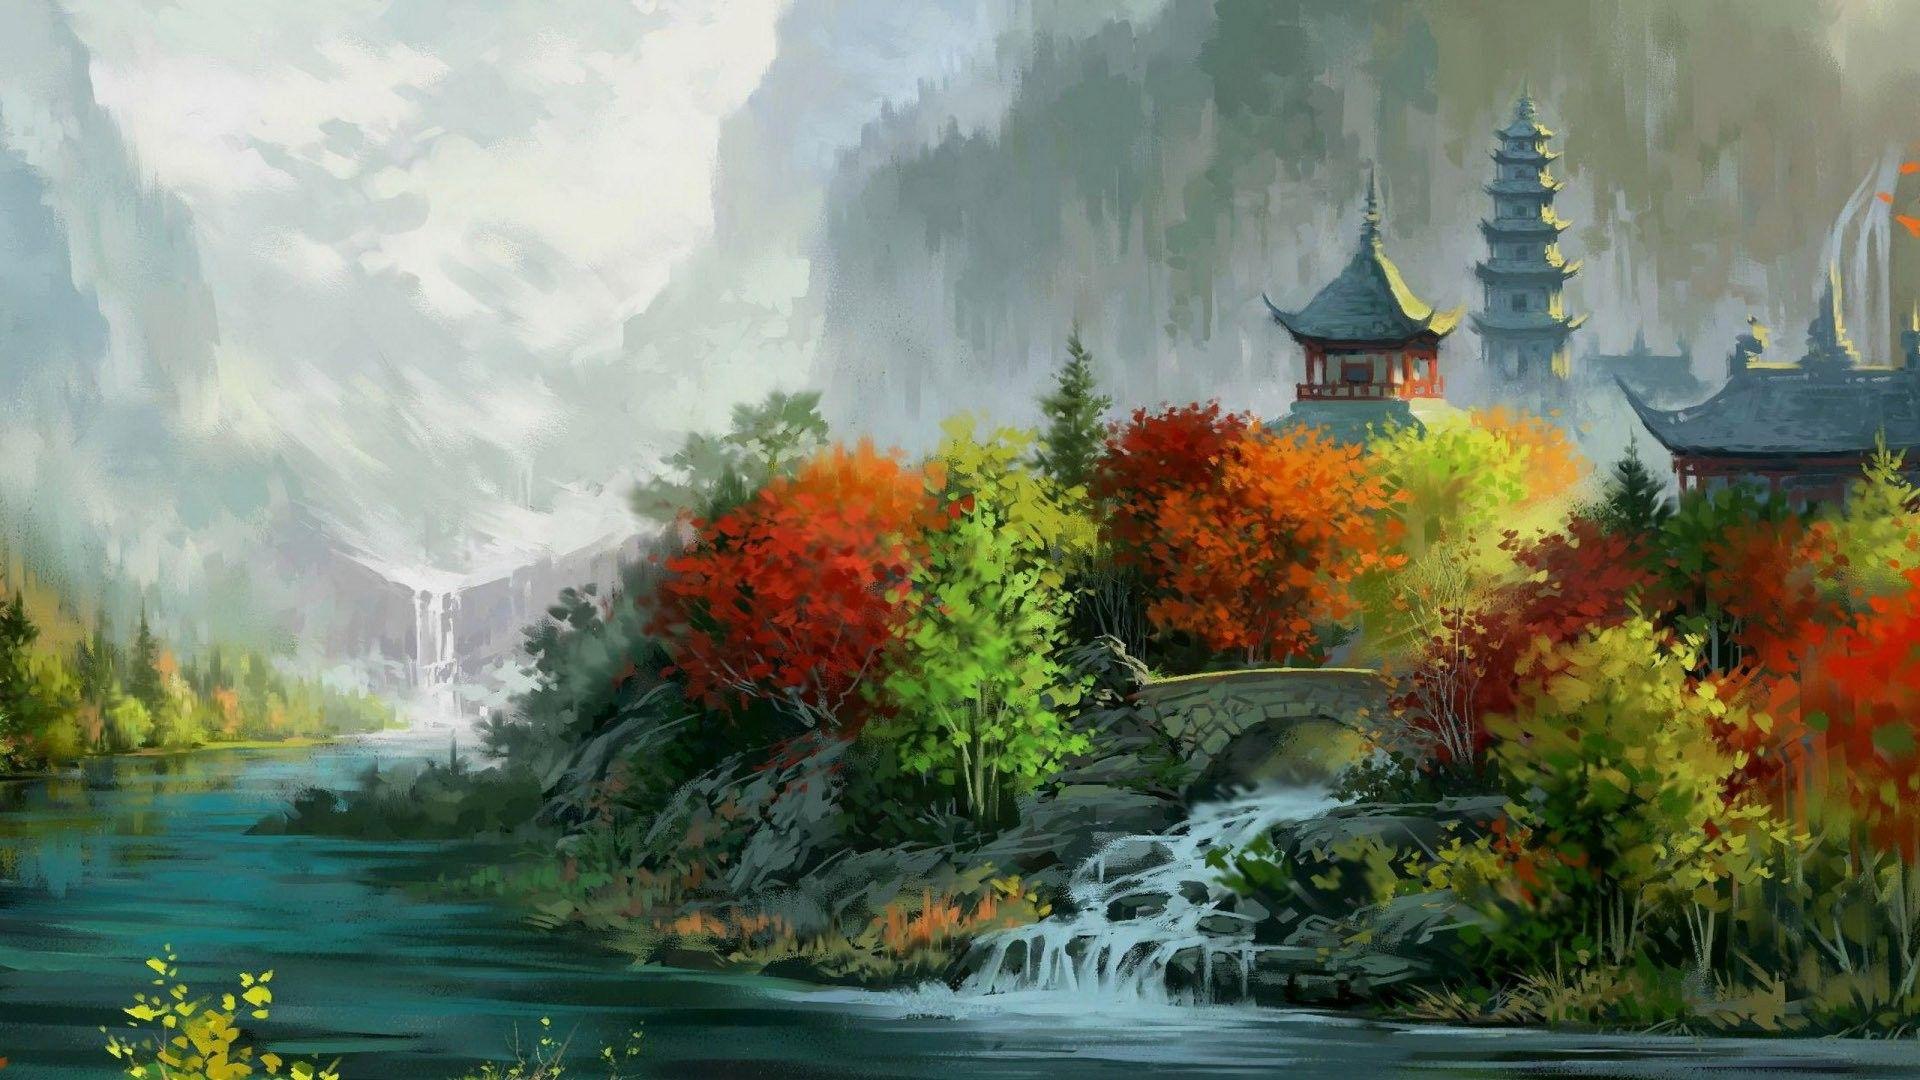 leaves, painting, digital art, asian architecture, house, tower